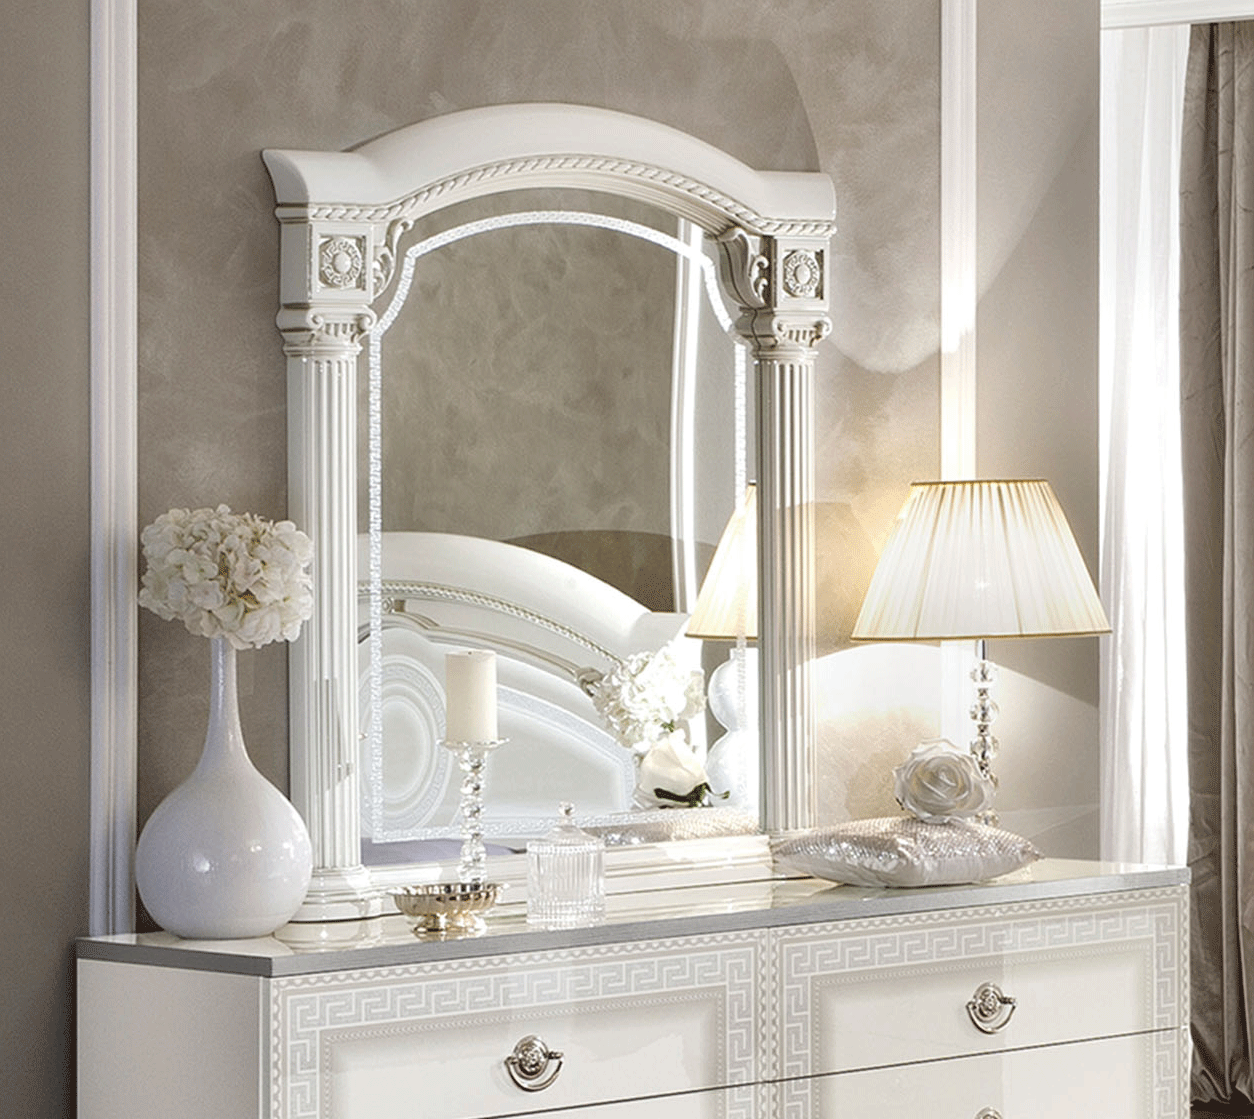 Bedroom Furniture Modern Bedrooms QS and KS Aida White/Silver mirror